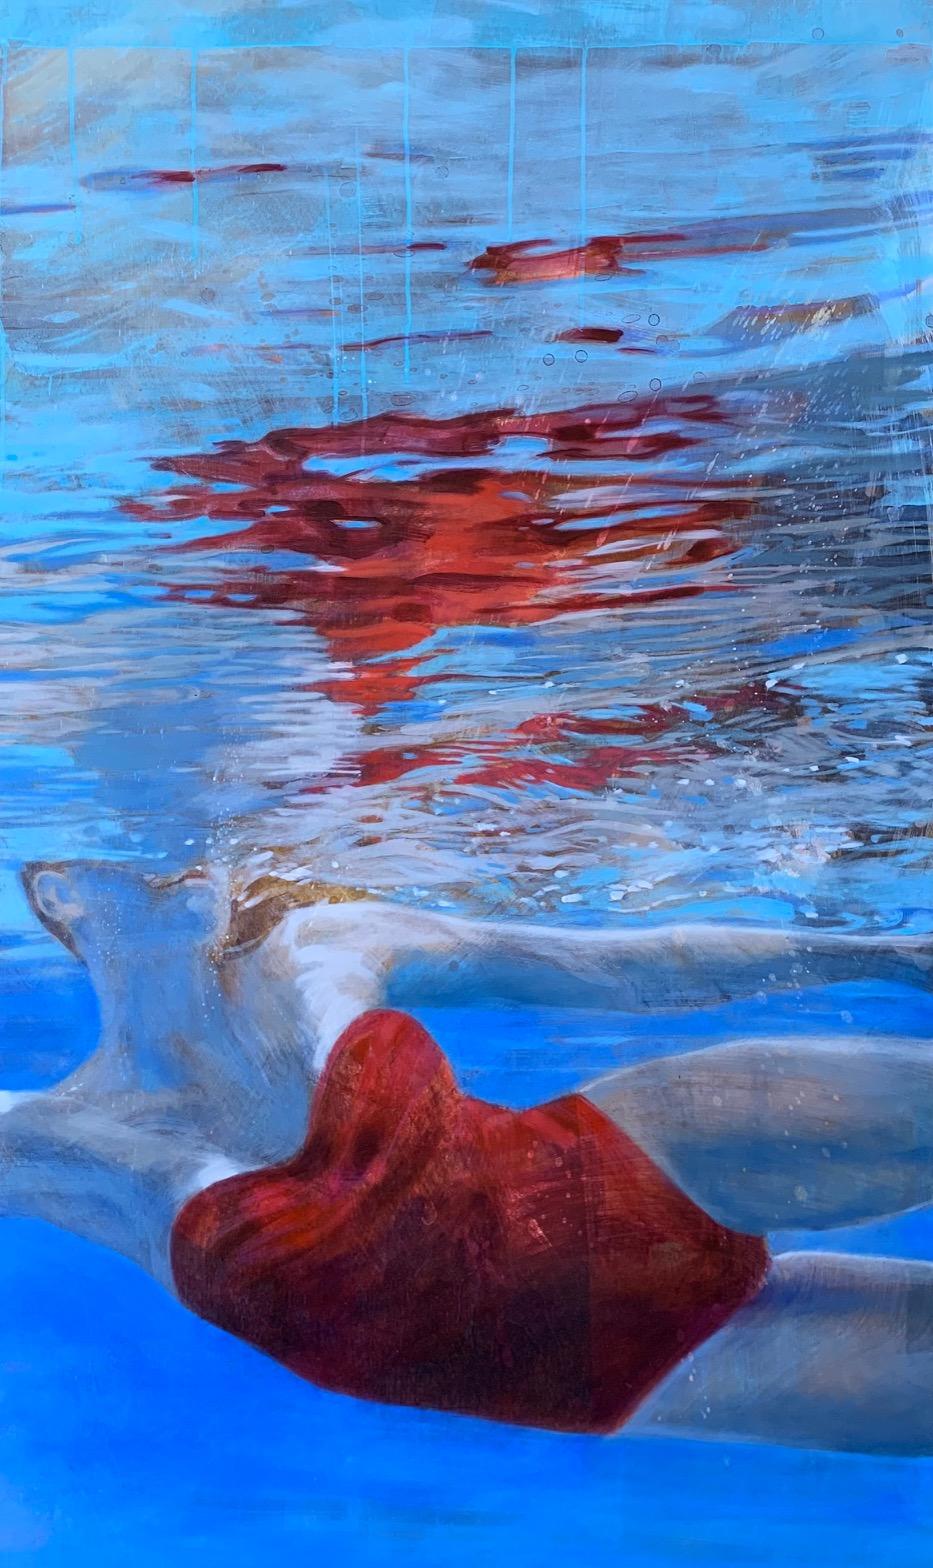 Carol Bennett Figurative Painting - "Rachael in Red and Aquamarine" Woman in Red swimsuit in crystalline blue water.